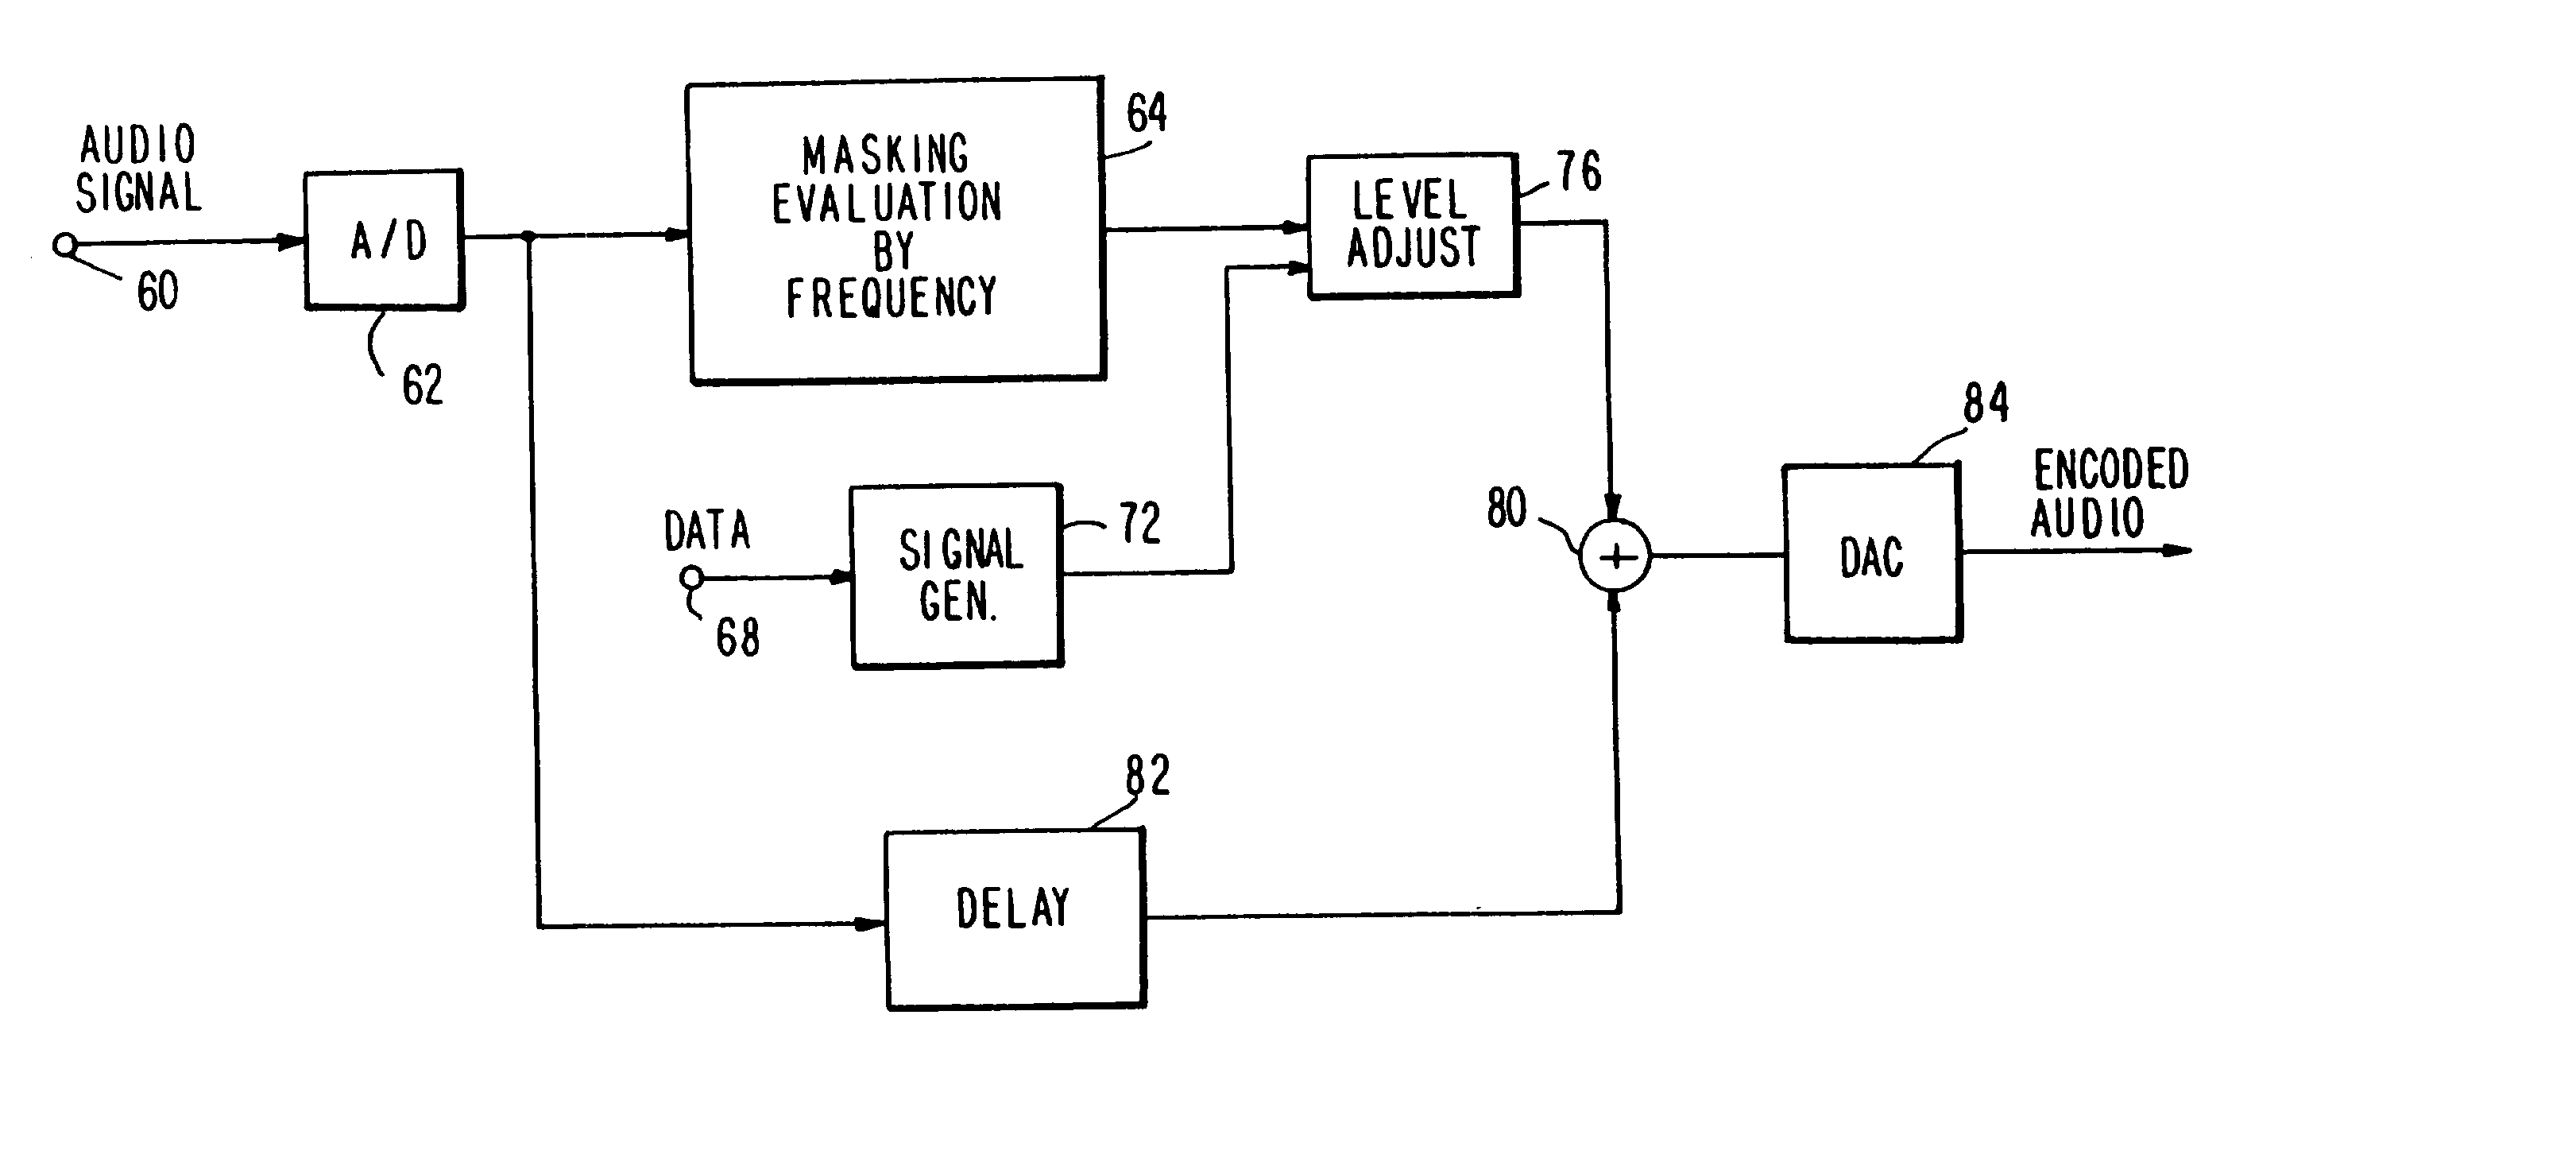 Apparatus and methods for including codes in audio signals